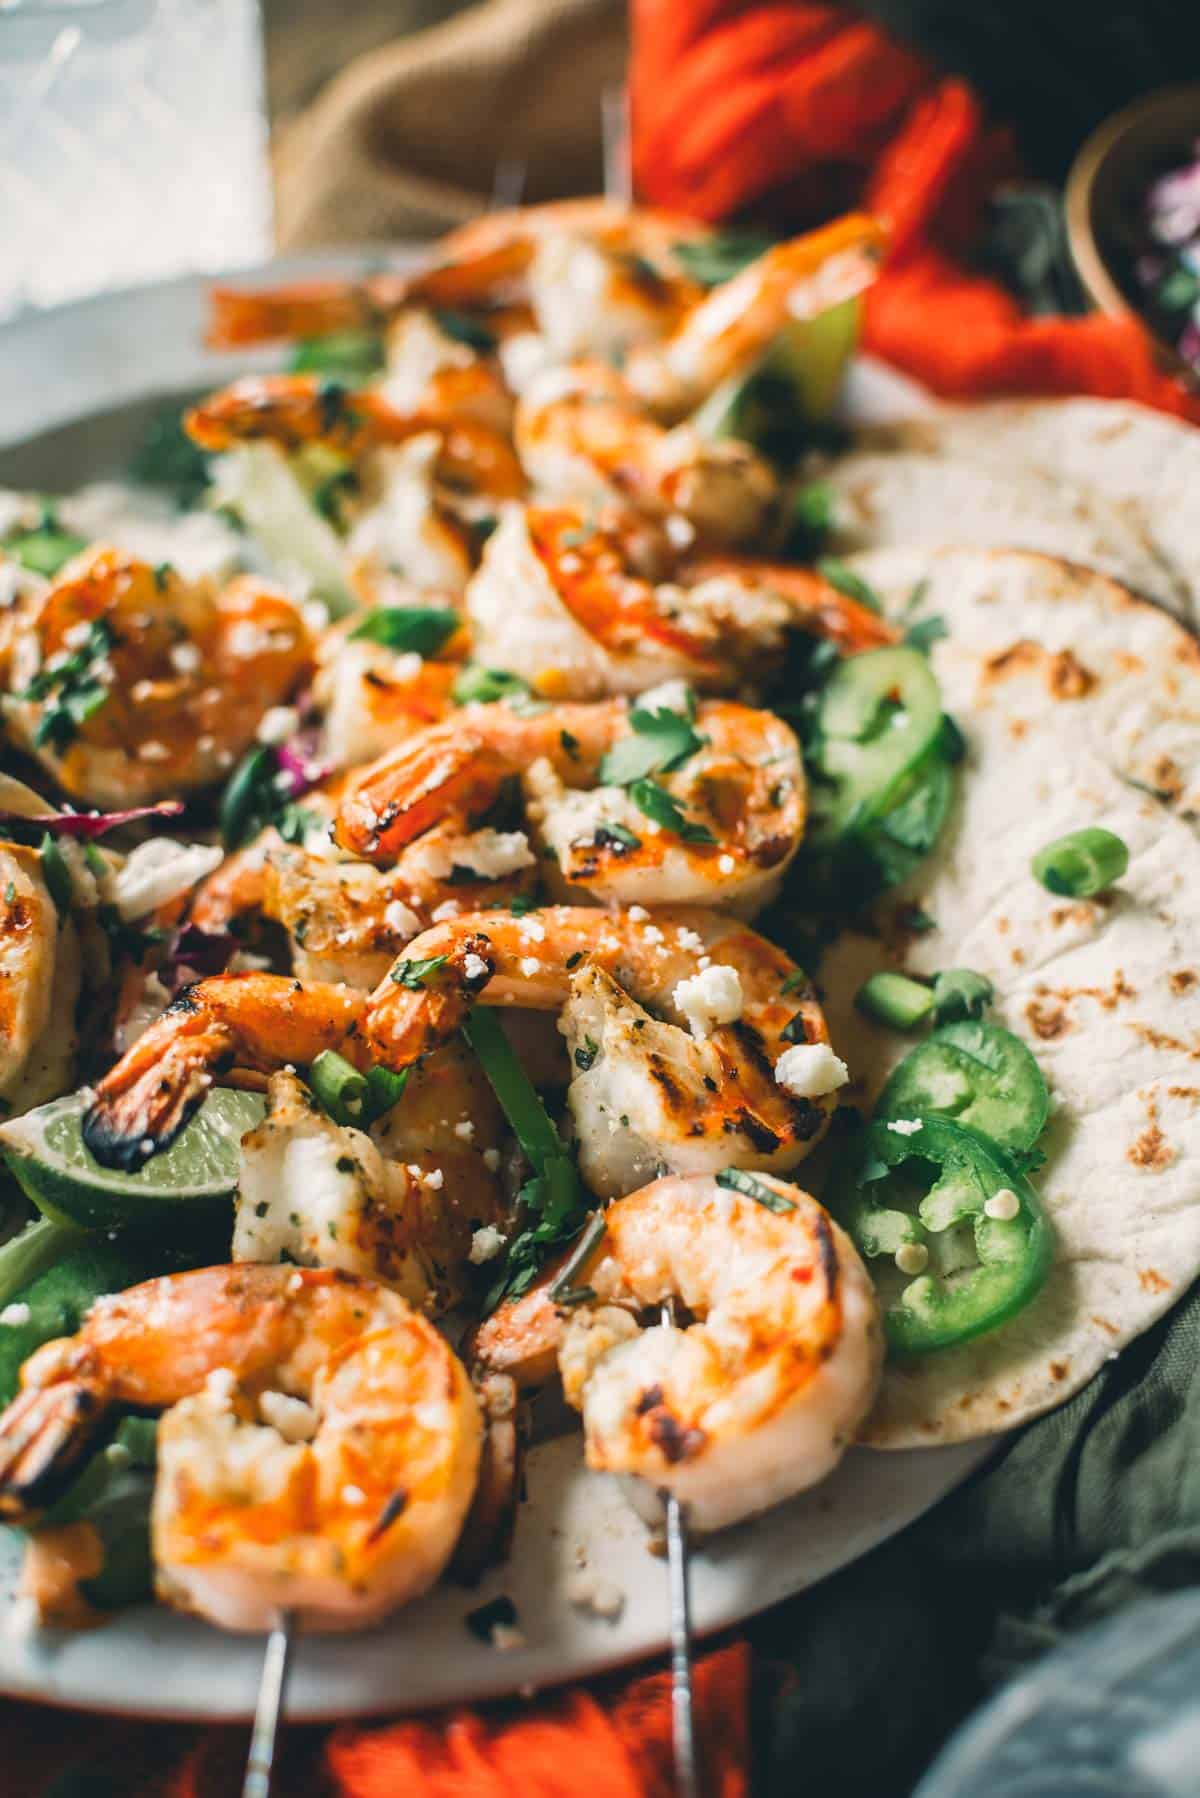 Grilled shrimp skewers topped with green onions and crumbled cheese, served with sliced jalapeños and tortillas on the side.